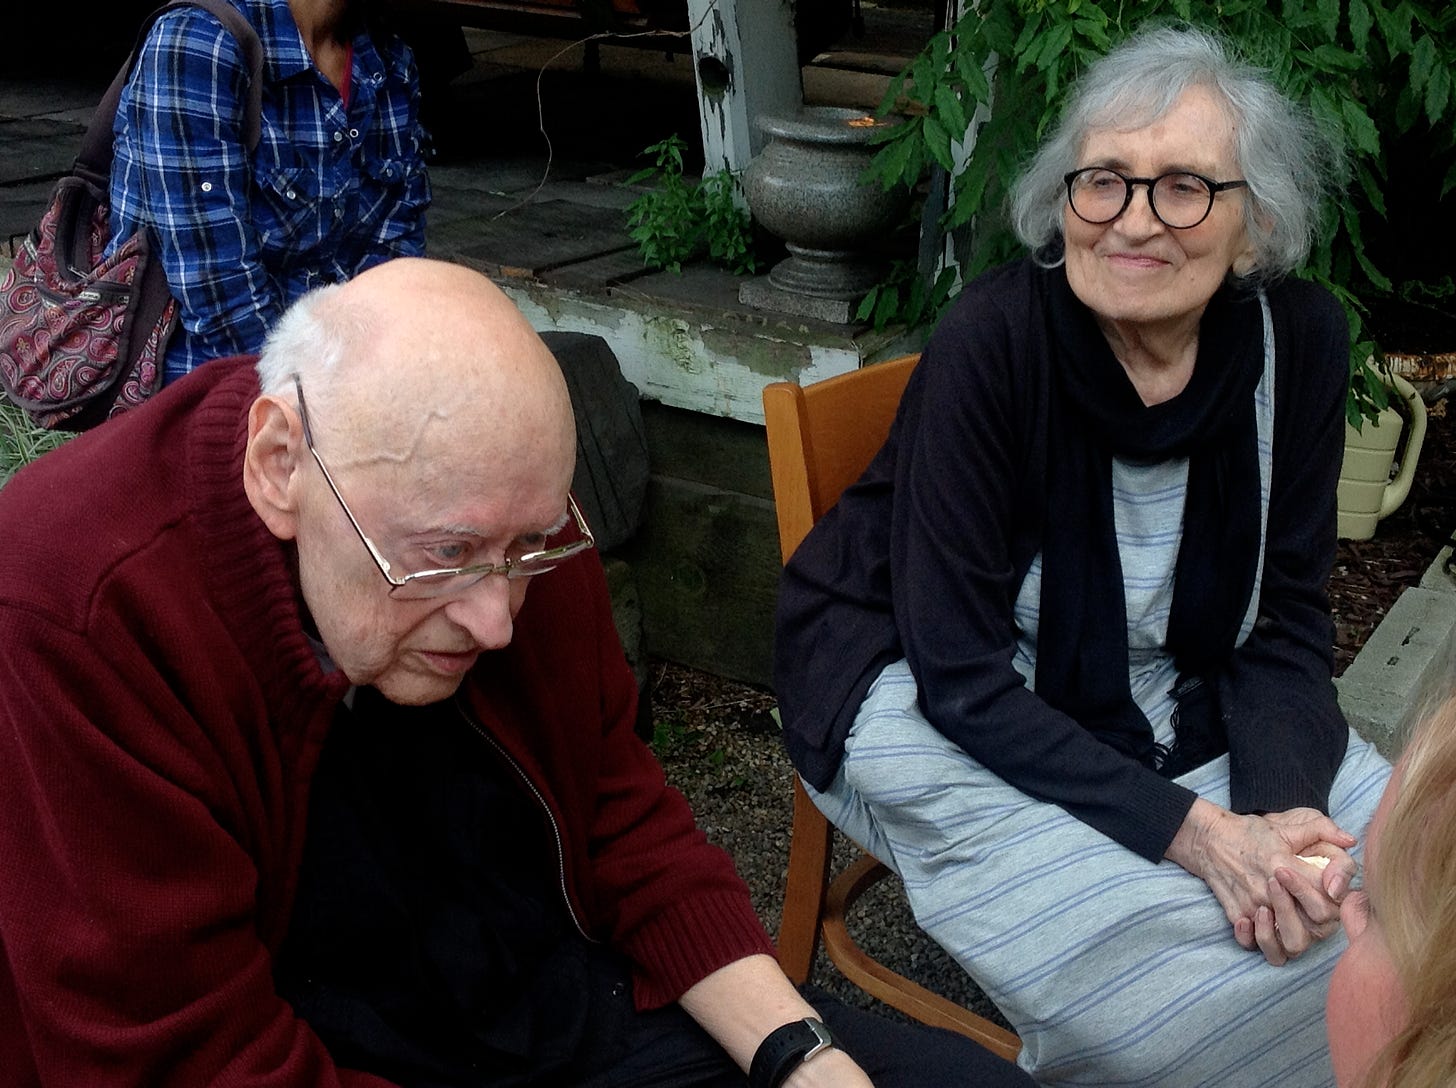 Frank and Bunny again, sitting in a garden. Bunny is smiling at Frank, whose hunched-over posture hints at the Alzheimer's he was then suffering from.